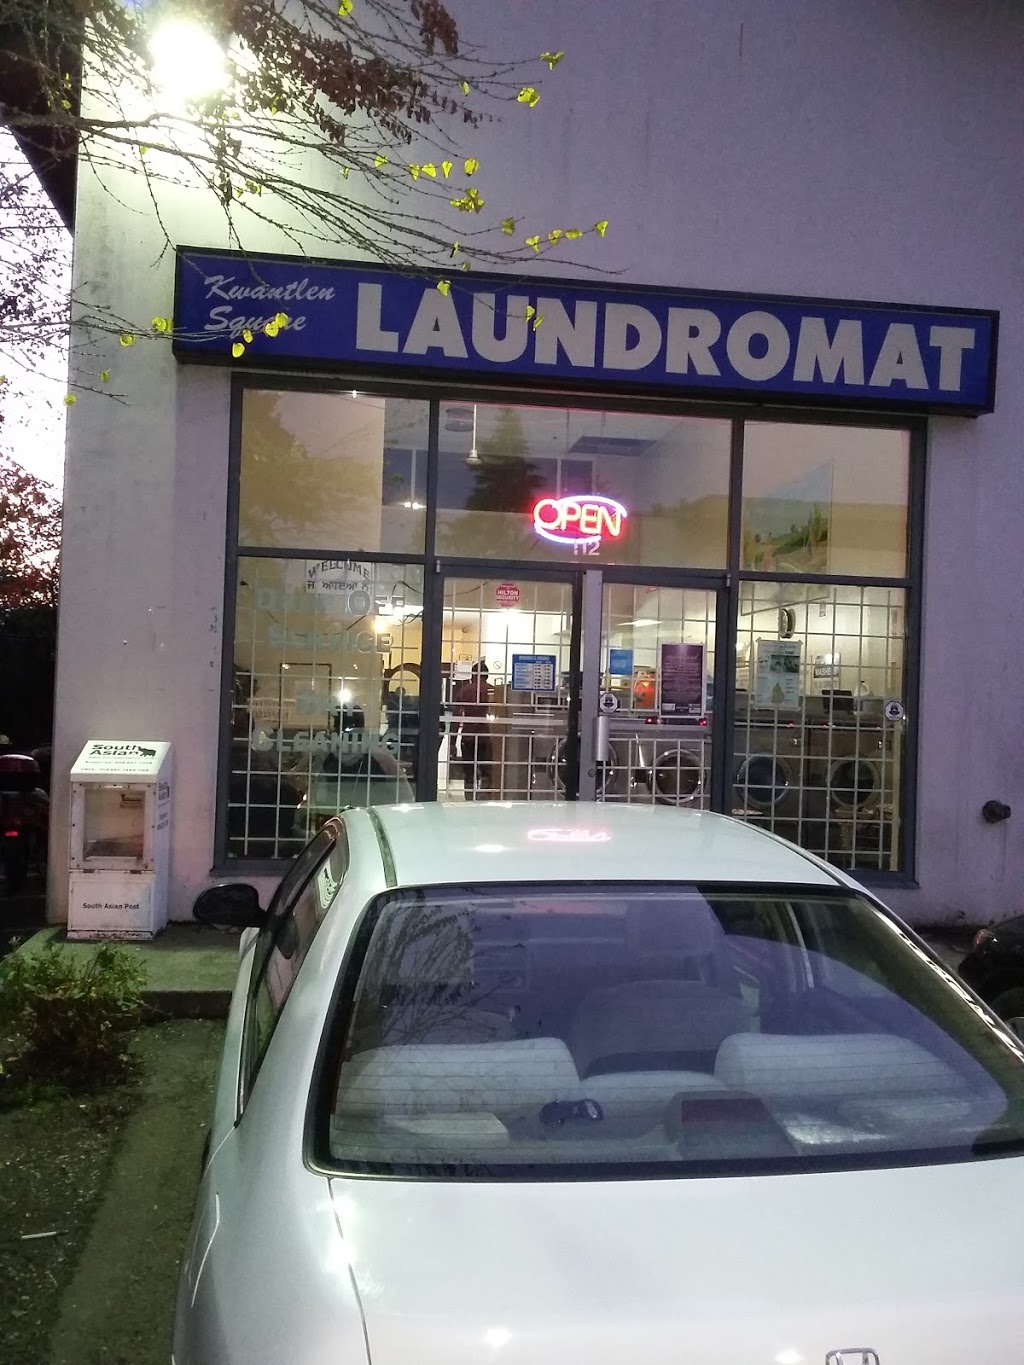 Kwantlen Square Laundromat | laundry | 12568 72 Ave #112, Surrey, BC V3W 2M6, Canada | 6045074365 OR +1 604-507-4365